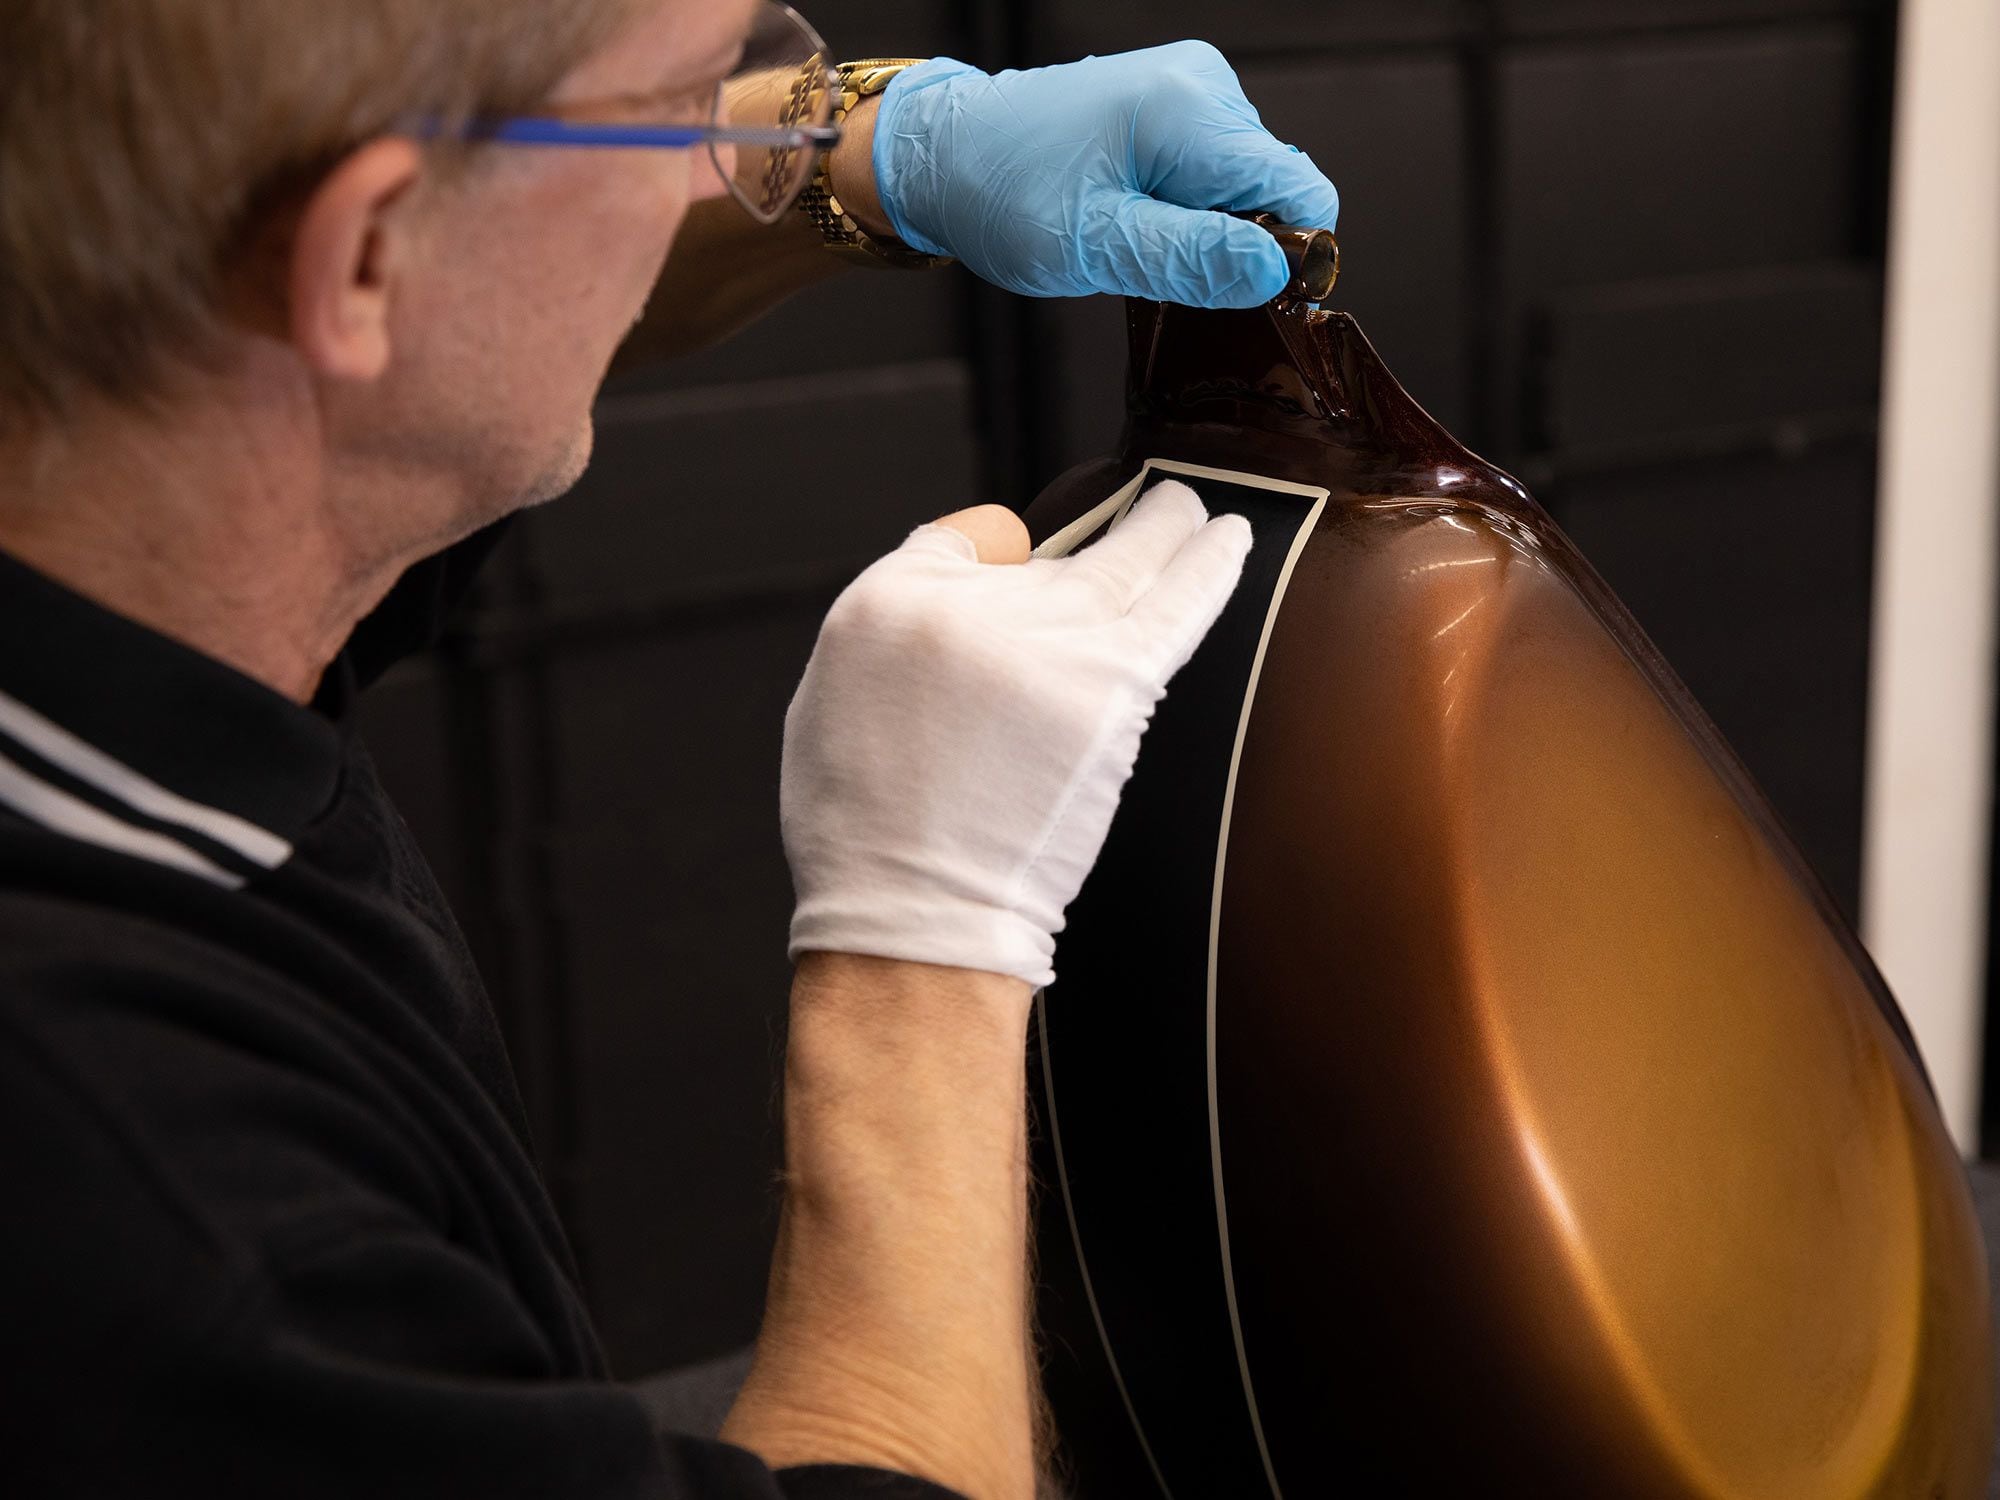 Triumph’s paint pros went to work on the hand-applied coachlines in the factory workshop.